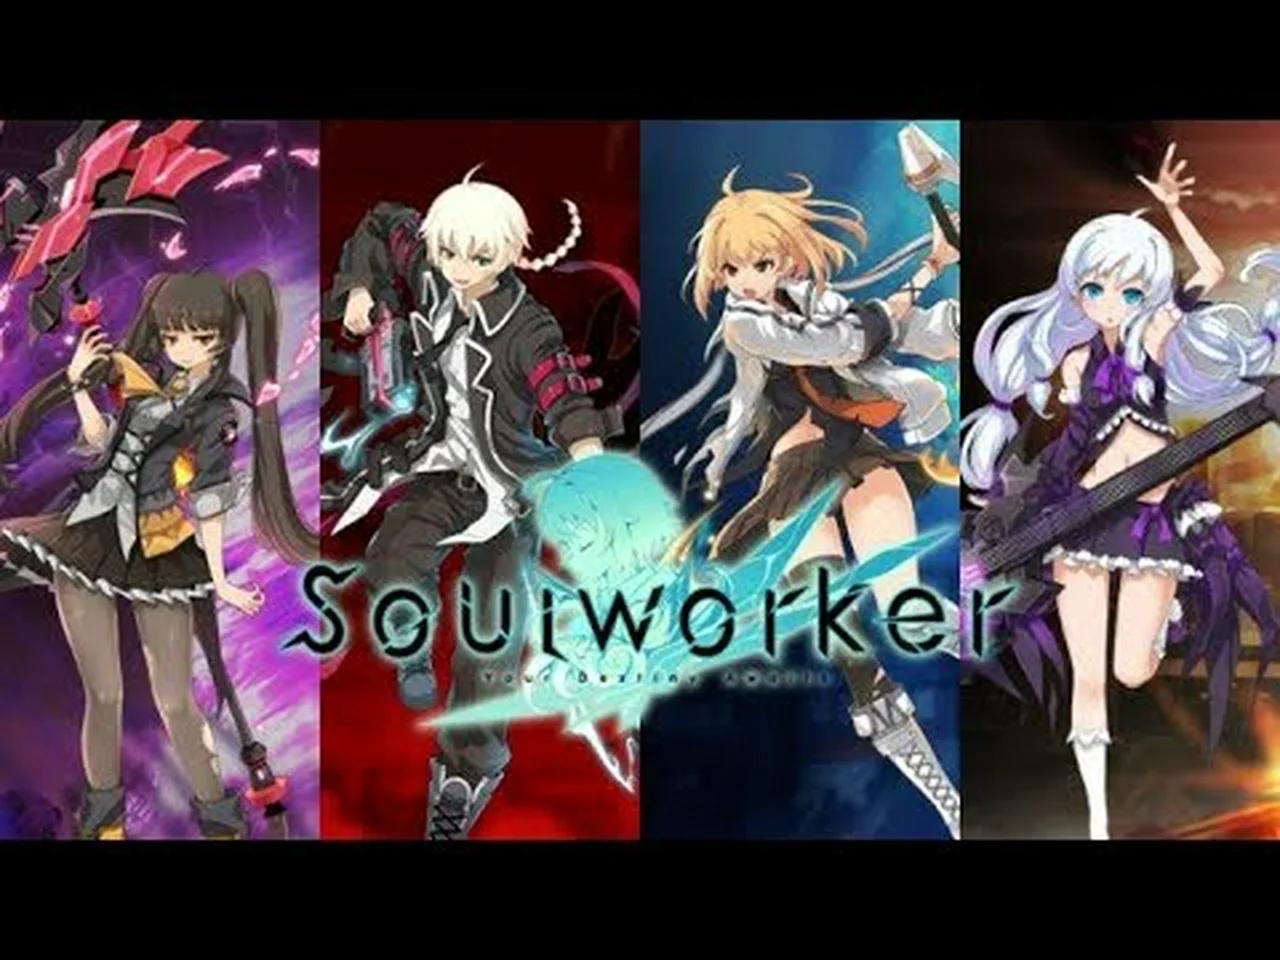 Soulworker anime action mmo стим фото 63